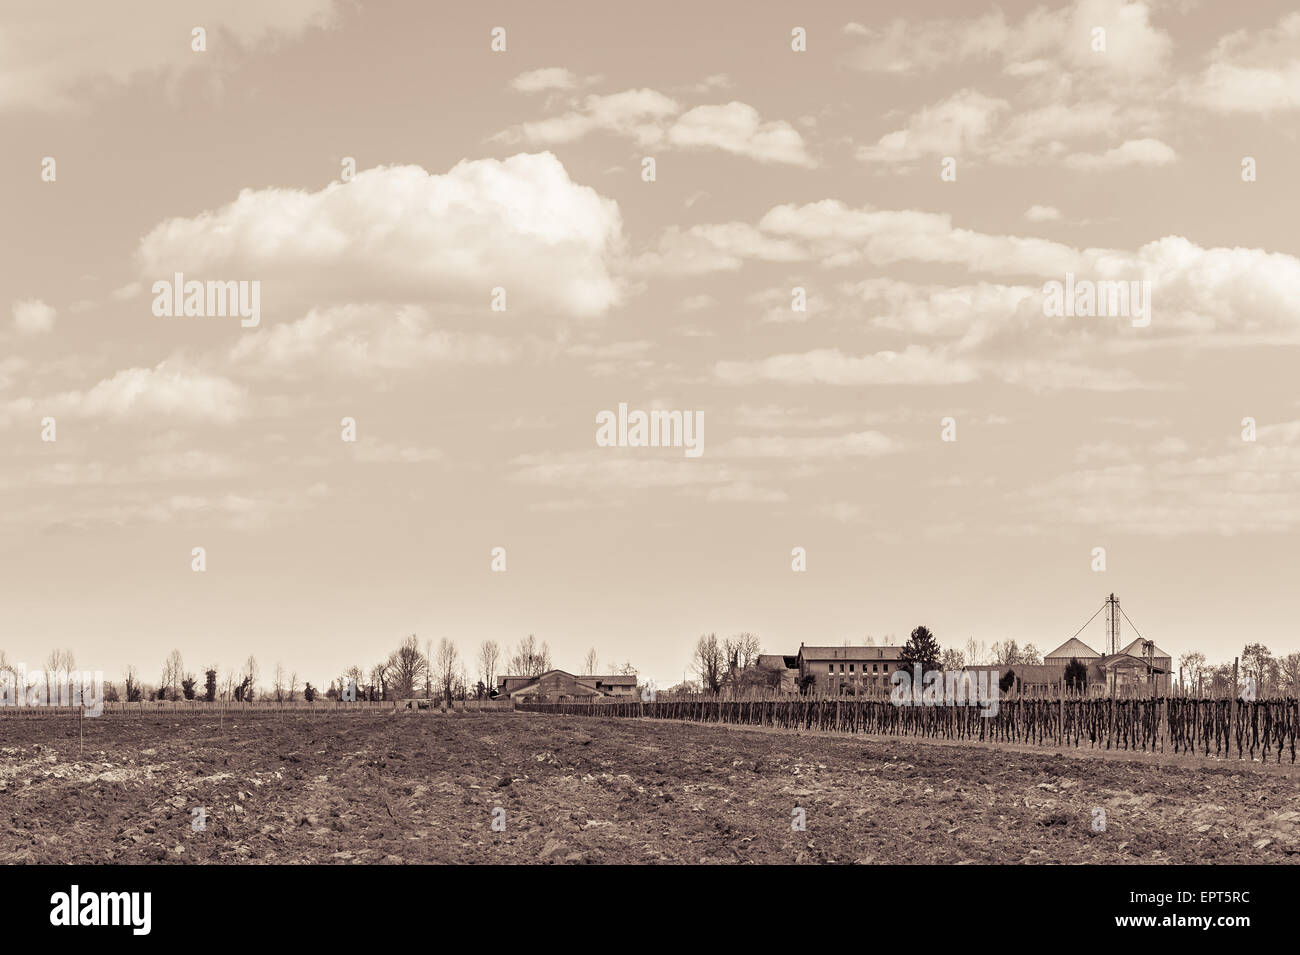 Vintage effect. Agricultural Landscape with vineyard and farm house in the background. Stock Photo